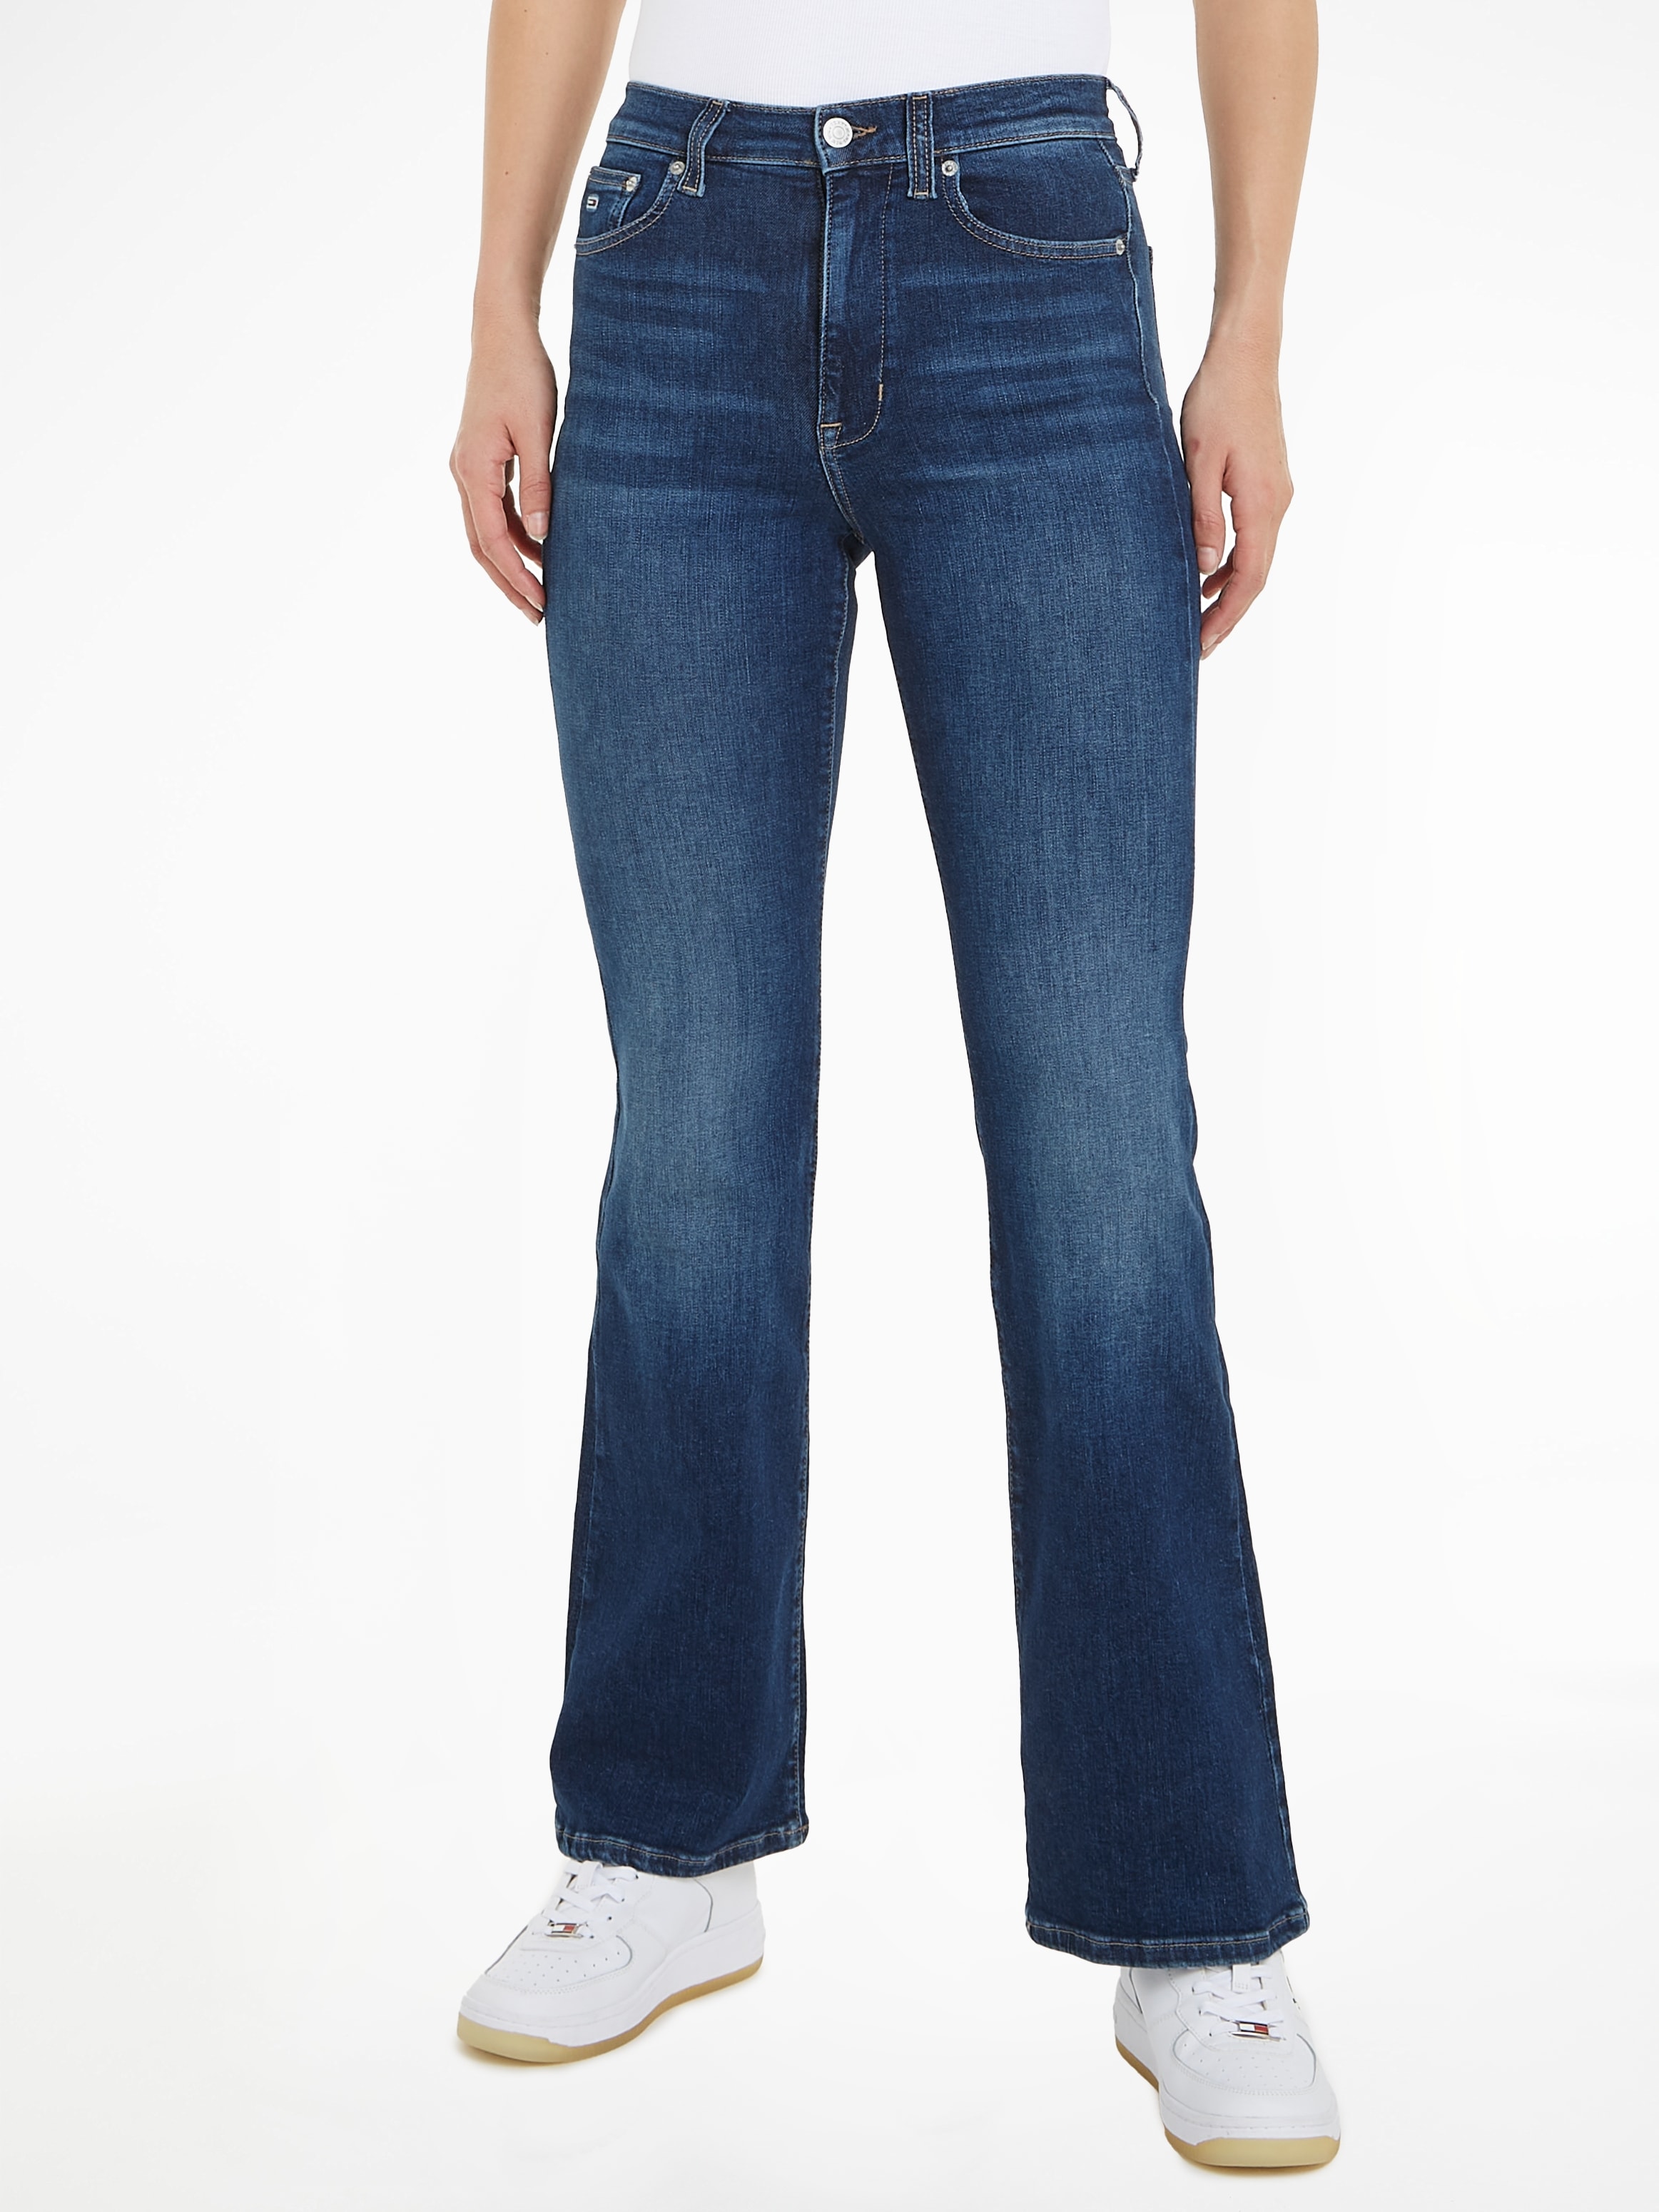 Tommy Jeans Bequeme Jeans "Sylvia", mit Markenlabel